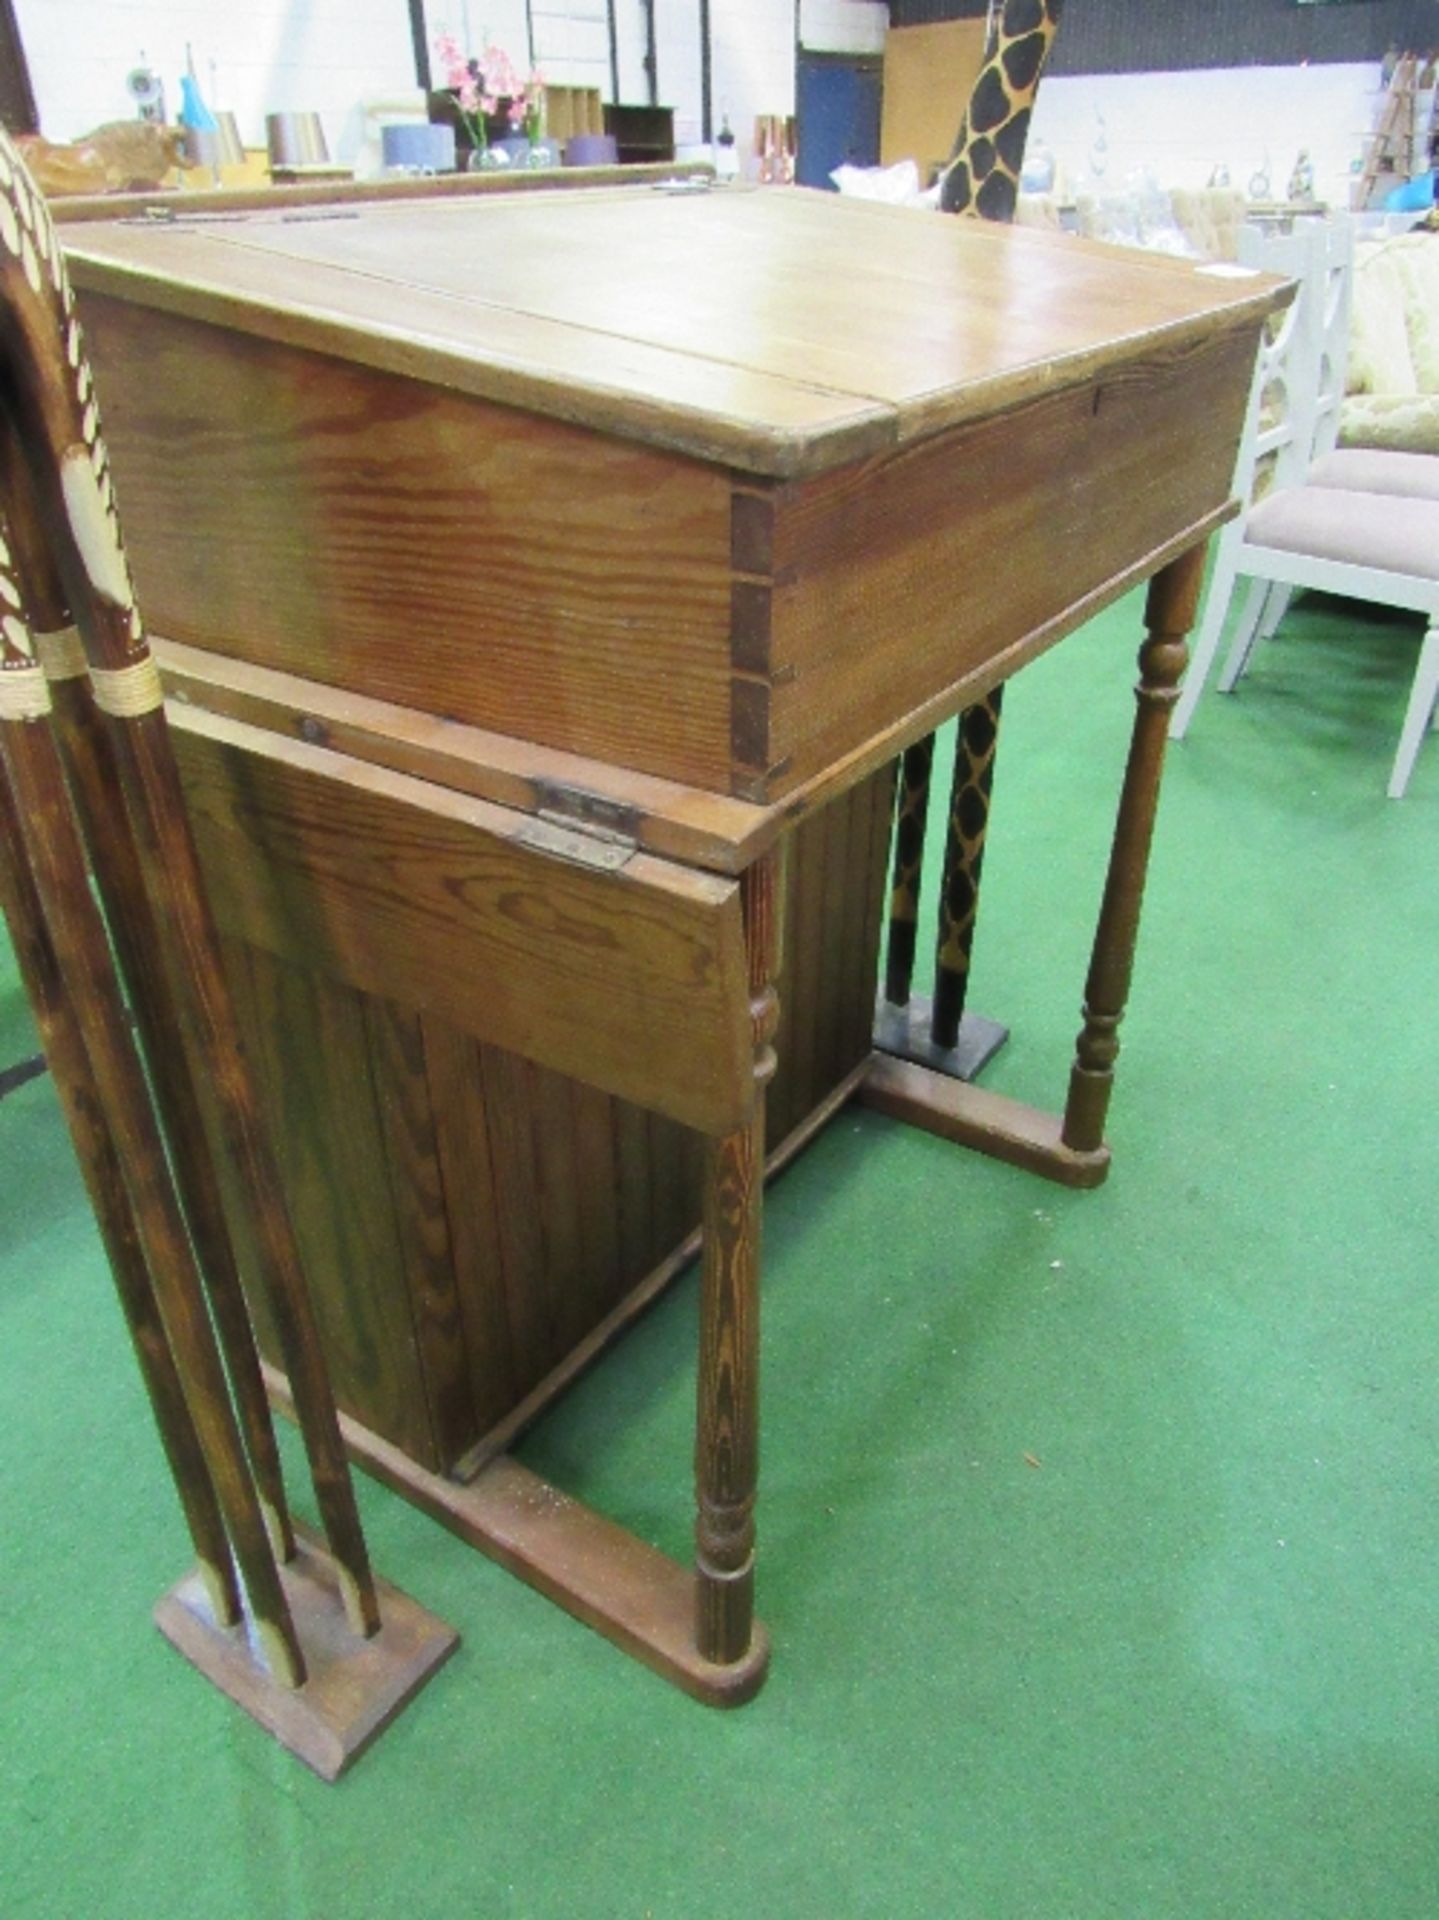 An antique pine 'Wake & Dean' school master's desk with rising lid, 2 ceramic inkwells, cupboard - Image 3 of 6